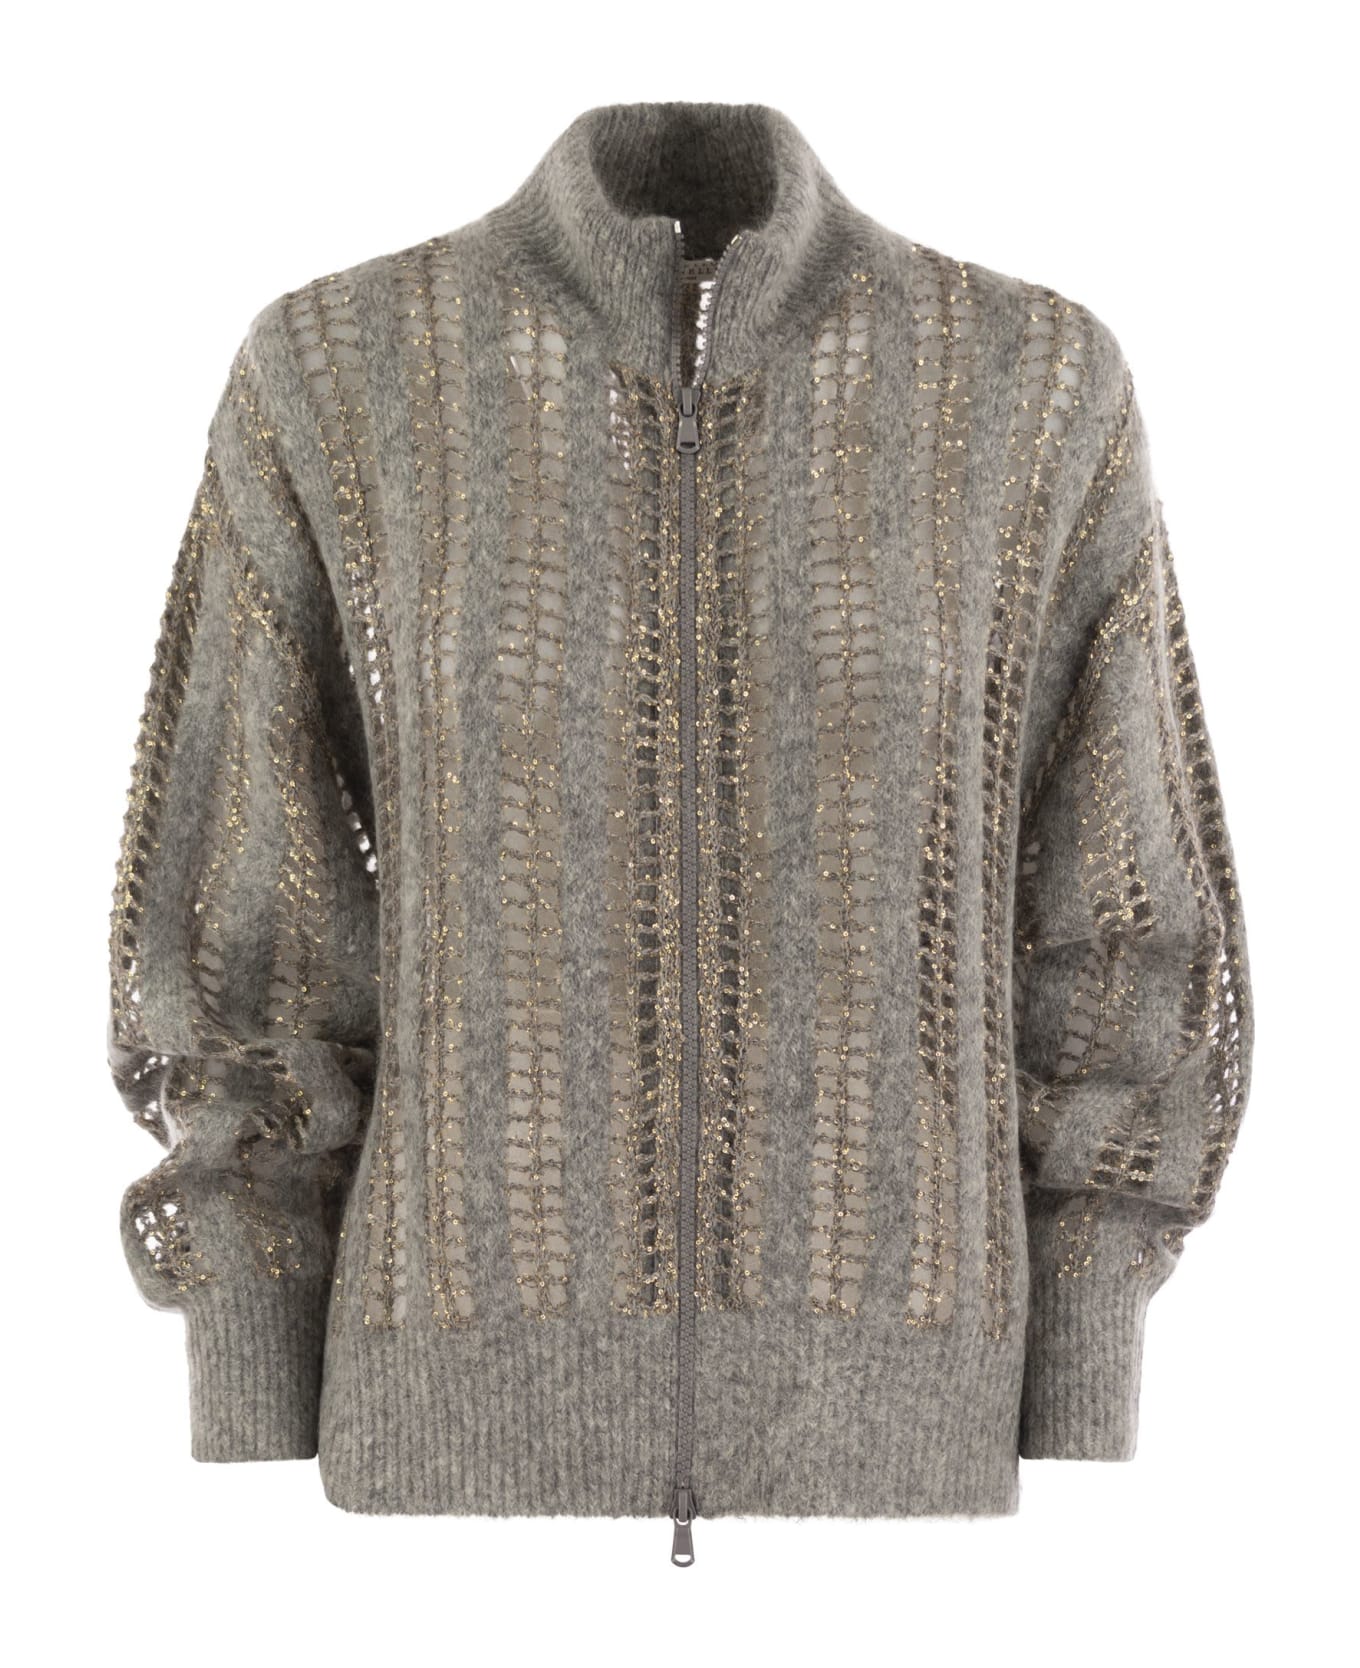 Brunello Cucinelli Wool And Mohair Cardigan With Mesh Workmanship - Grey